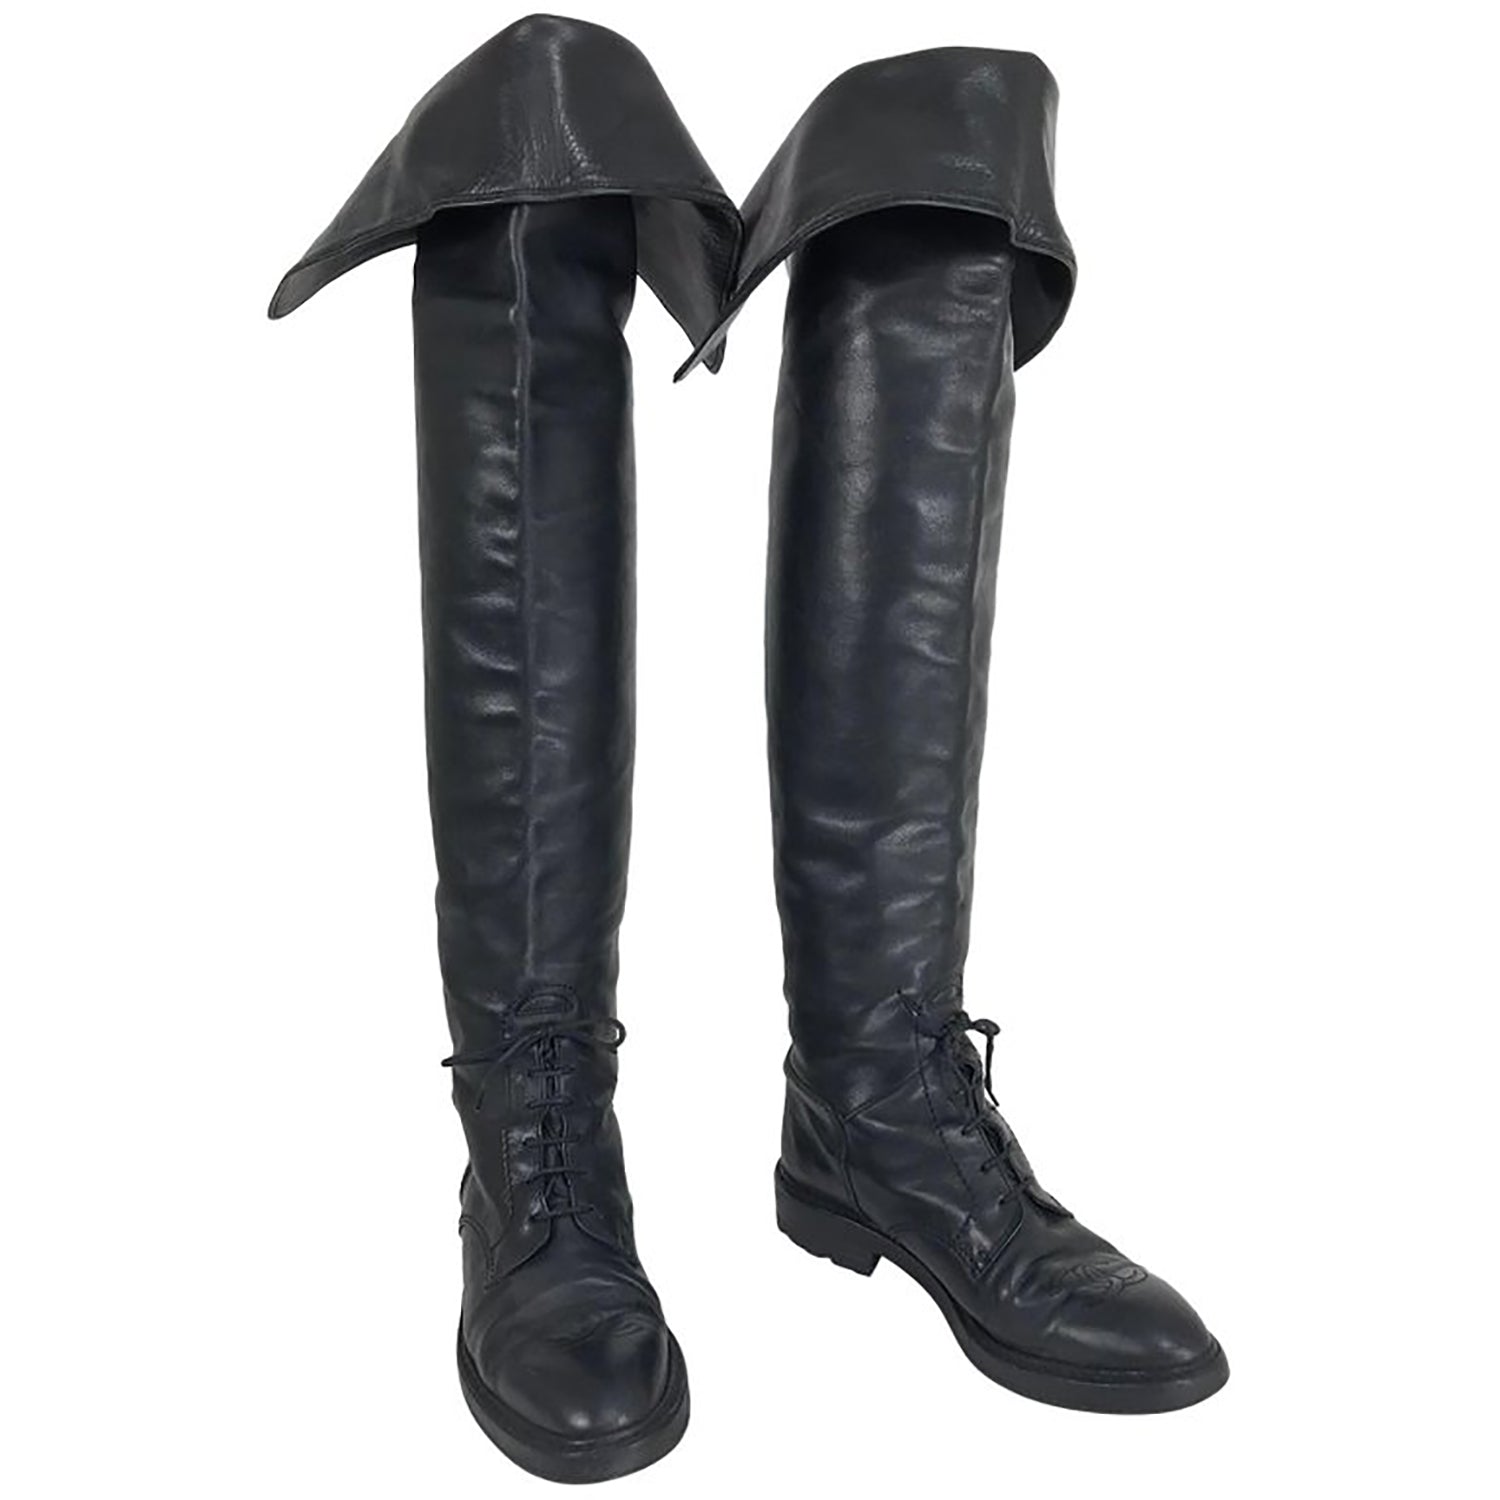 SOLD Chanel Over the knee black leather riding boots Claudia